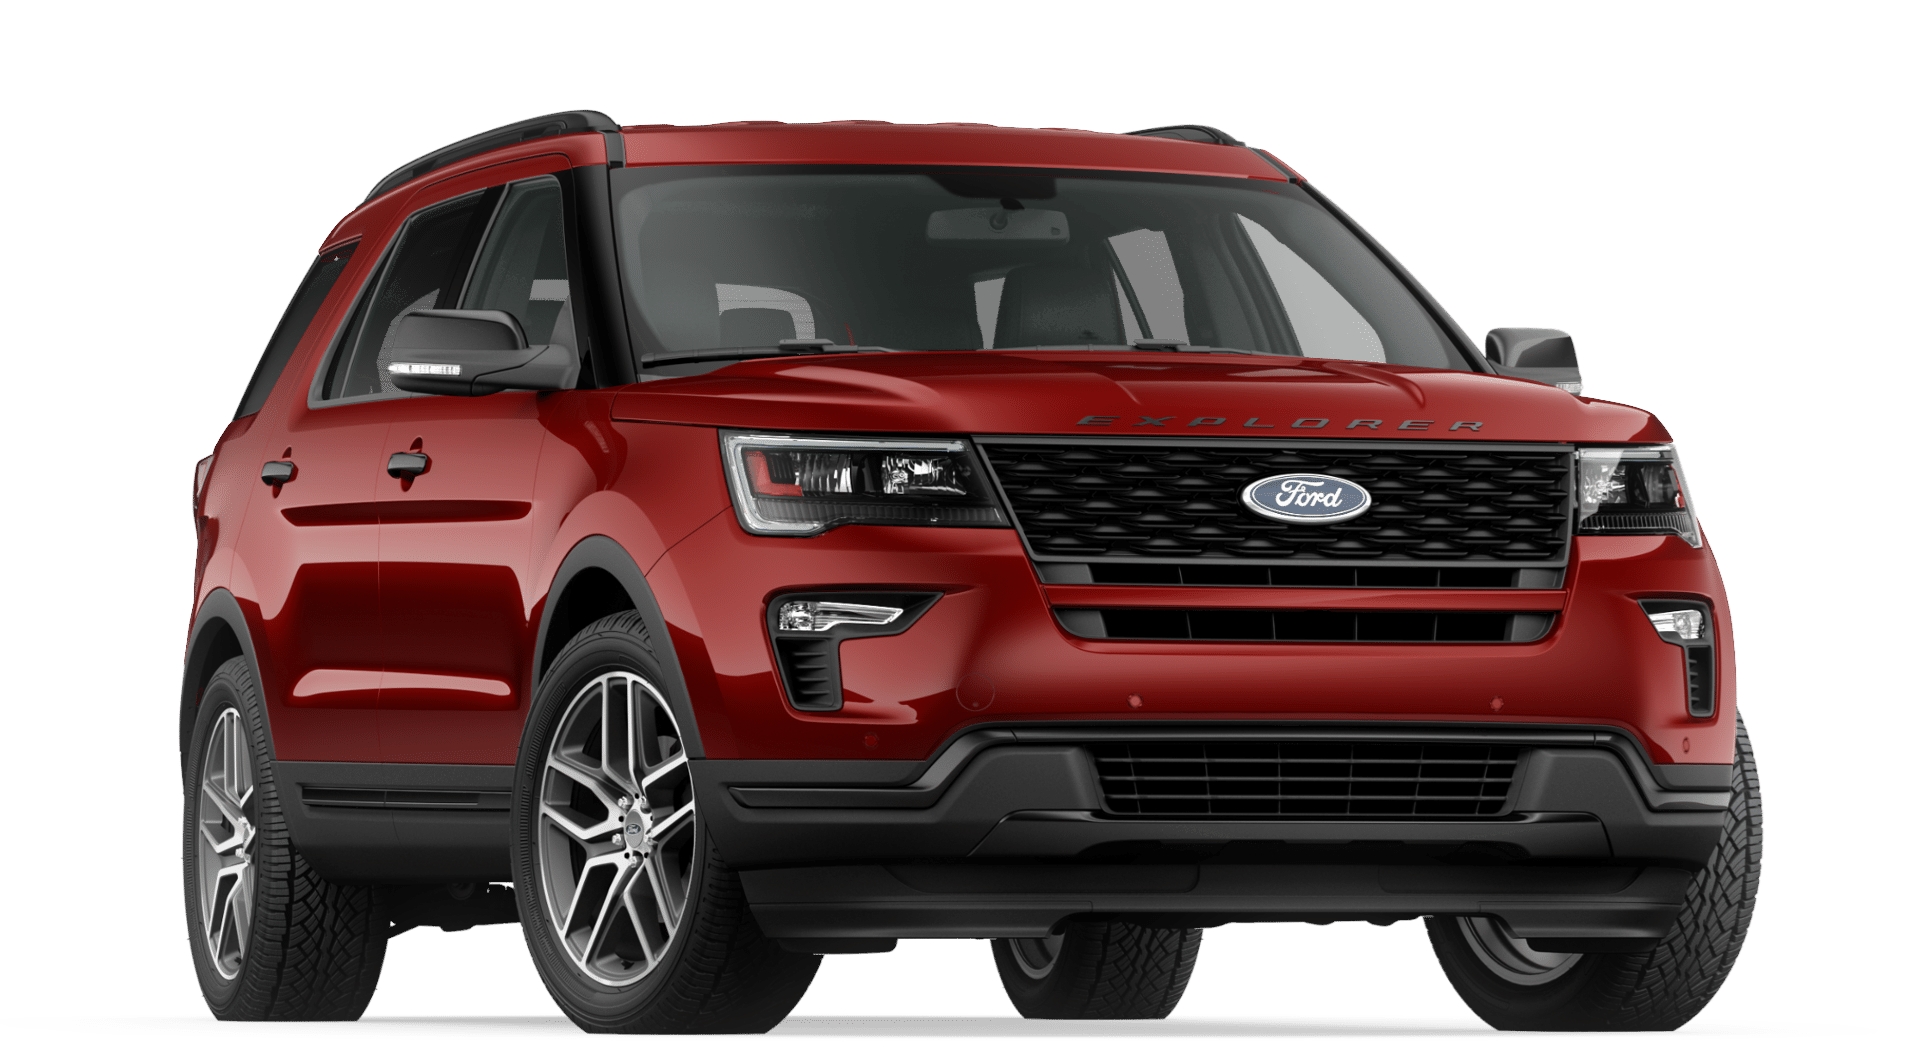 2018 Ford Explorer Sport Full Specs, Features and Price | CarBuzz